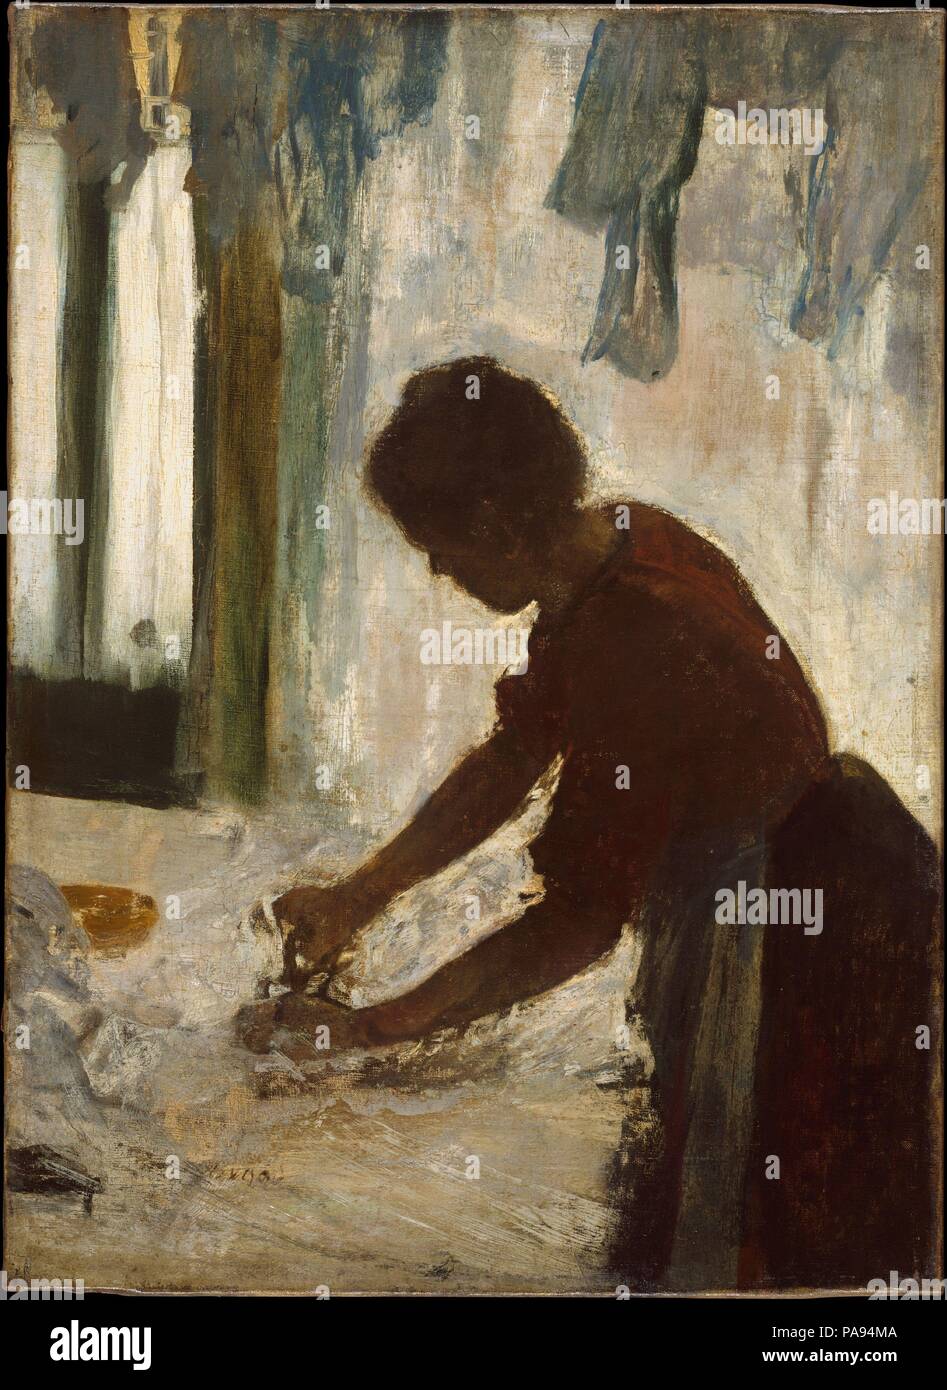 A Woman Ironing. Artist: Edgar Degas (French, Paris 1834-1917 Paris). Dimensions: 21 3/8 x 15 1/2 in. (54.3 x 39.4 cm). Date: 1873.  Much as Degas was fascinated by the movements of dancers, he was also intrigued by the repetitive, specialized gestures made by laundresses as they worked. This painting, the first of three versions of the composition, is distinguished by its dramatic chiaroscuro, with the woman silhouetted against a luminous white backdrop. Purchased by the singer and collector Jean-Baptiste Faure, the canvas was returned so that Degas could rework it. The artist, however, kept  Stock Photo